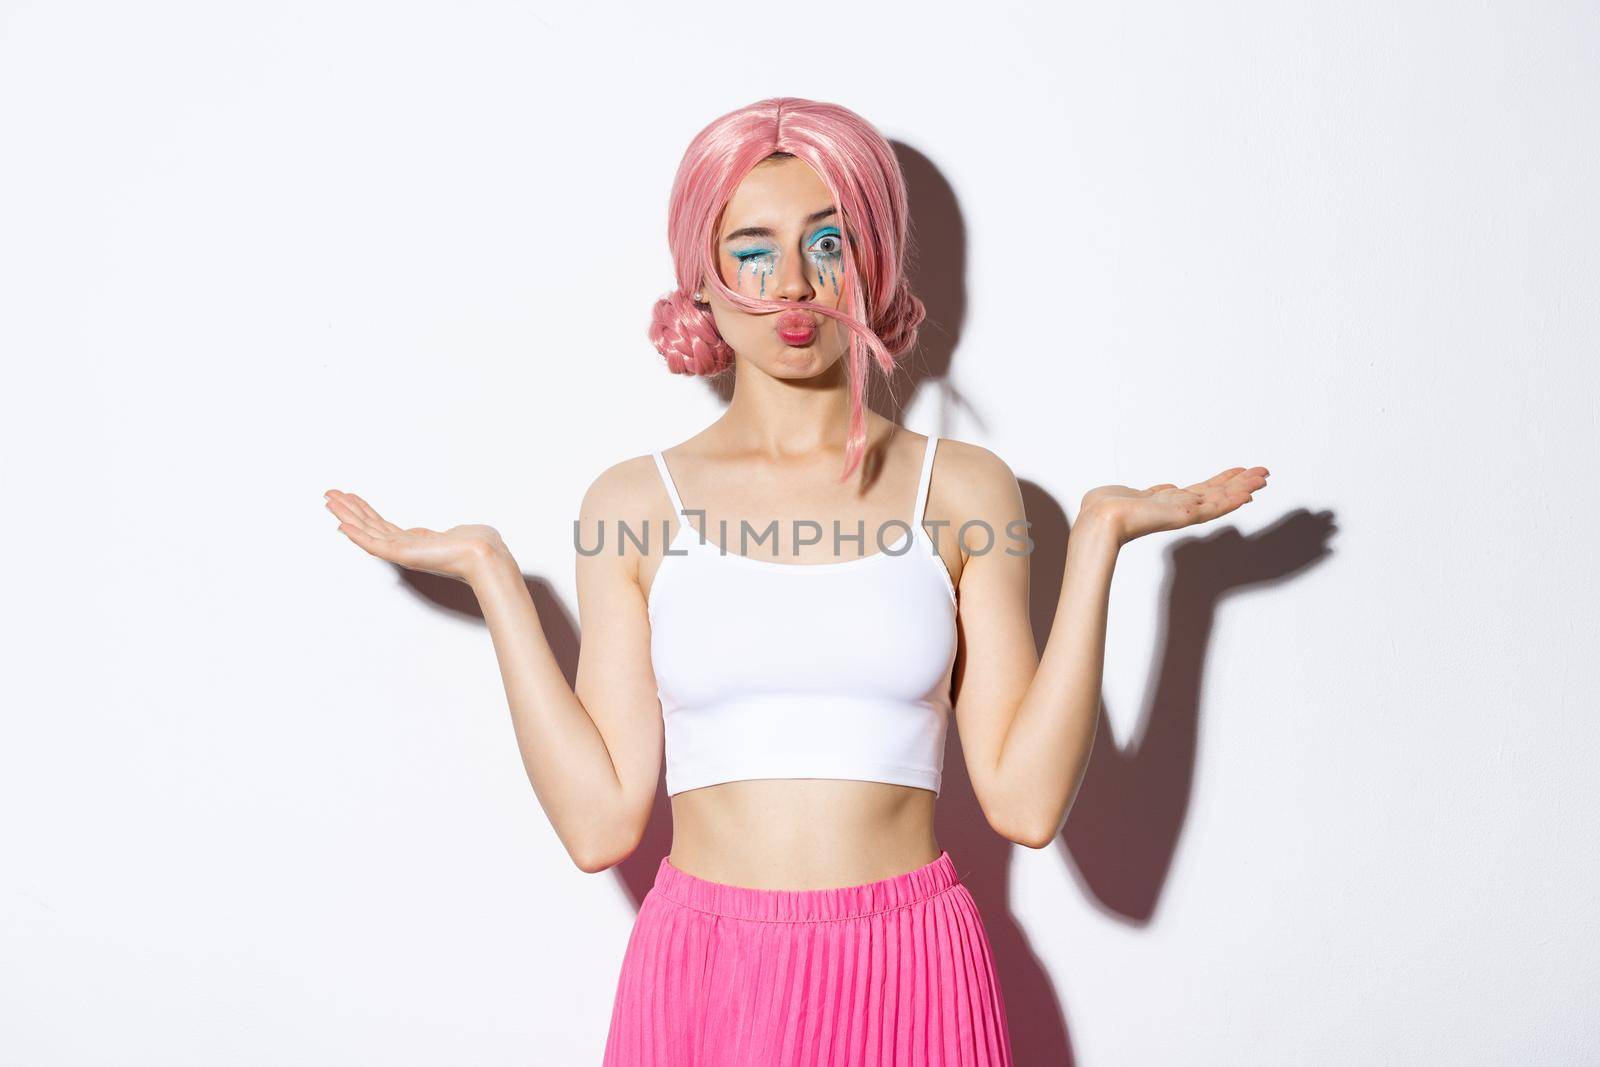 Portrait of silly pop girl wearing pink wig, winking at camera while holding something in both hands, standing over white background.